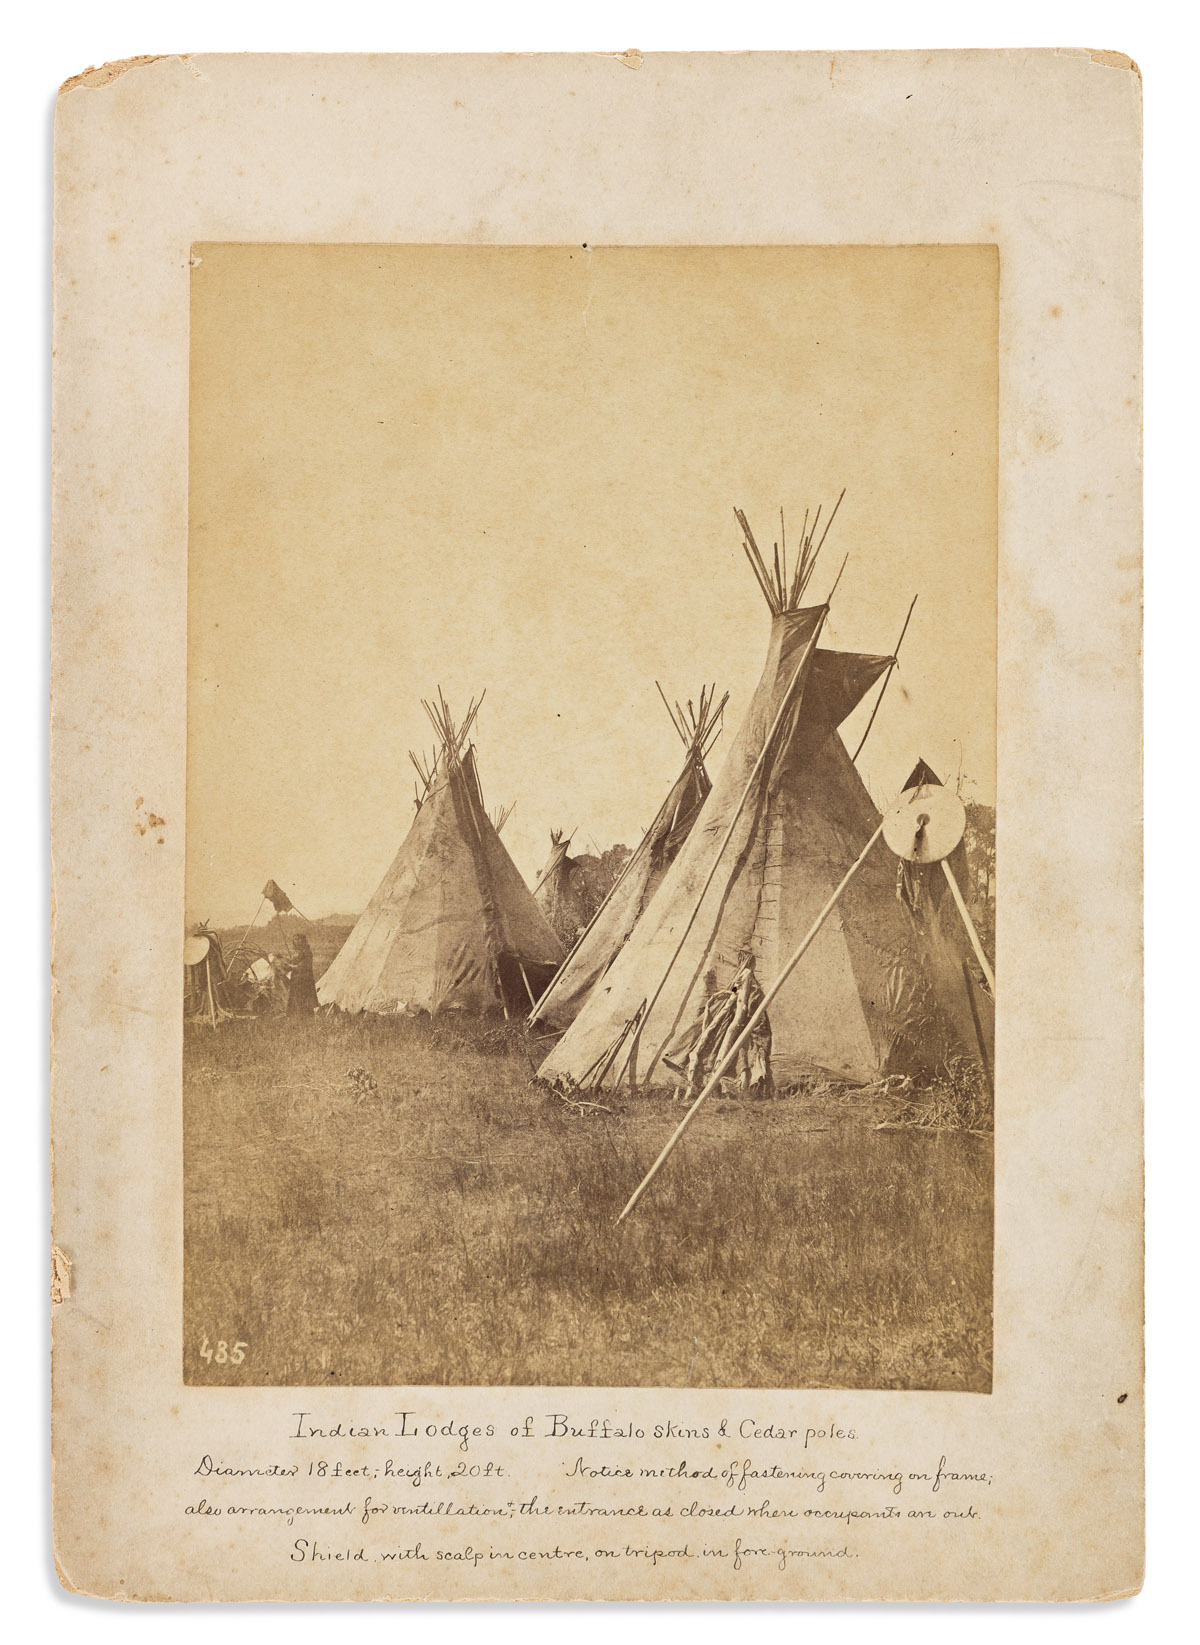 (AMERICAN INDIANS--PHOTOGRAPHS.) William Soule. Indian Lodges of Buffalo Skins & Cedar Poles.